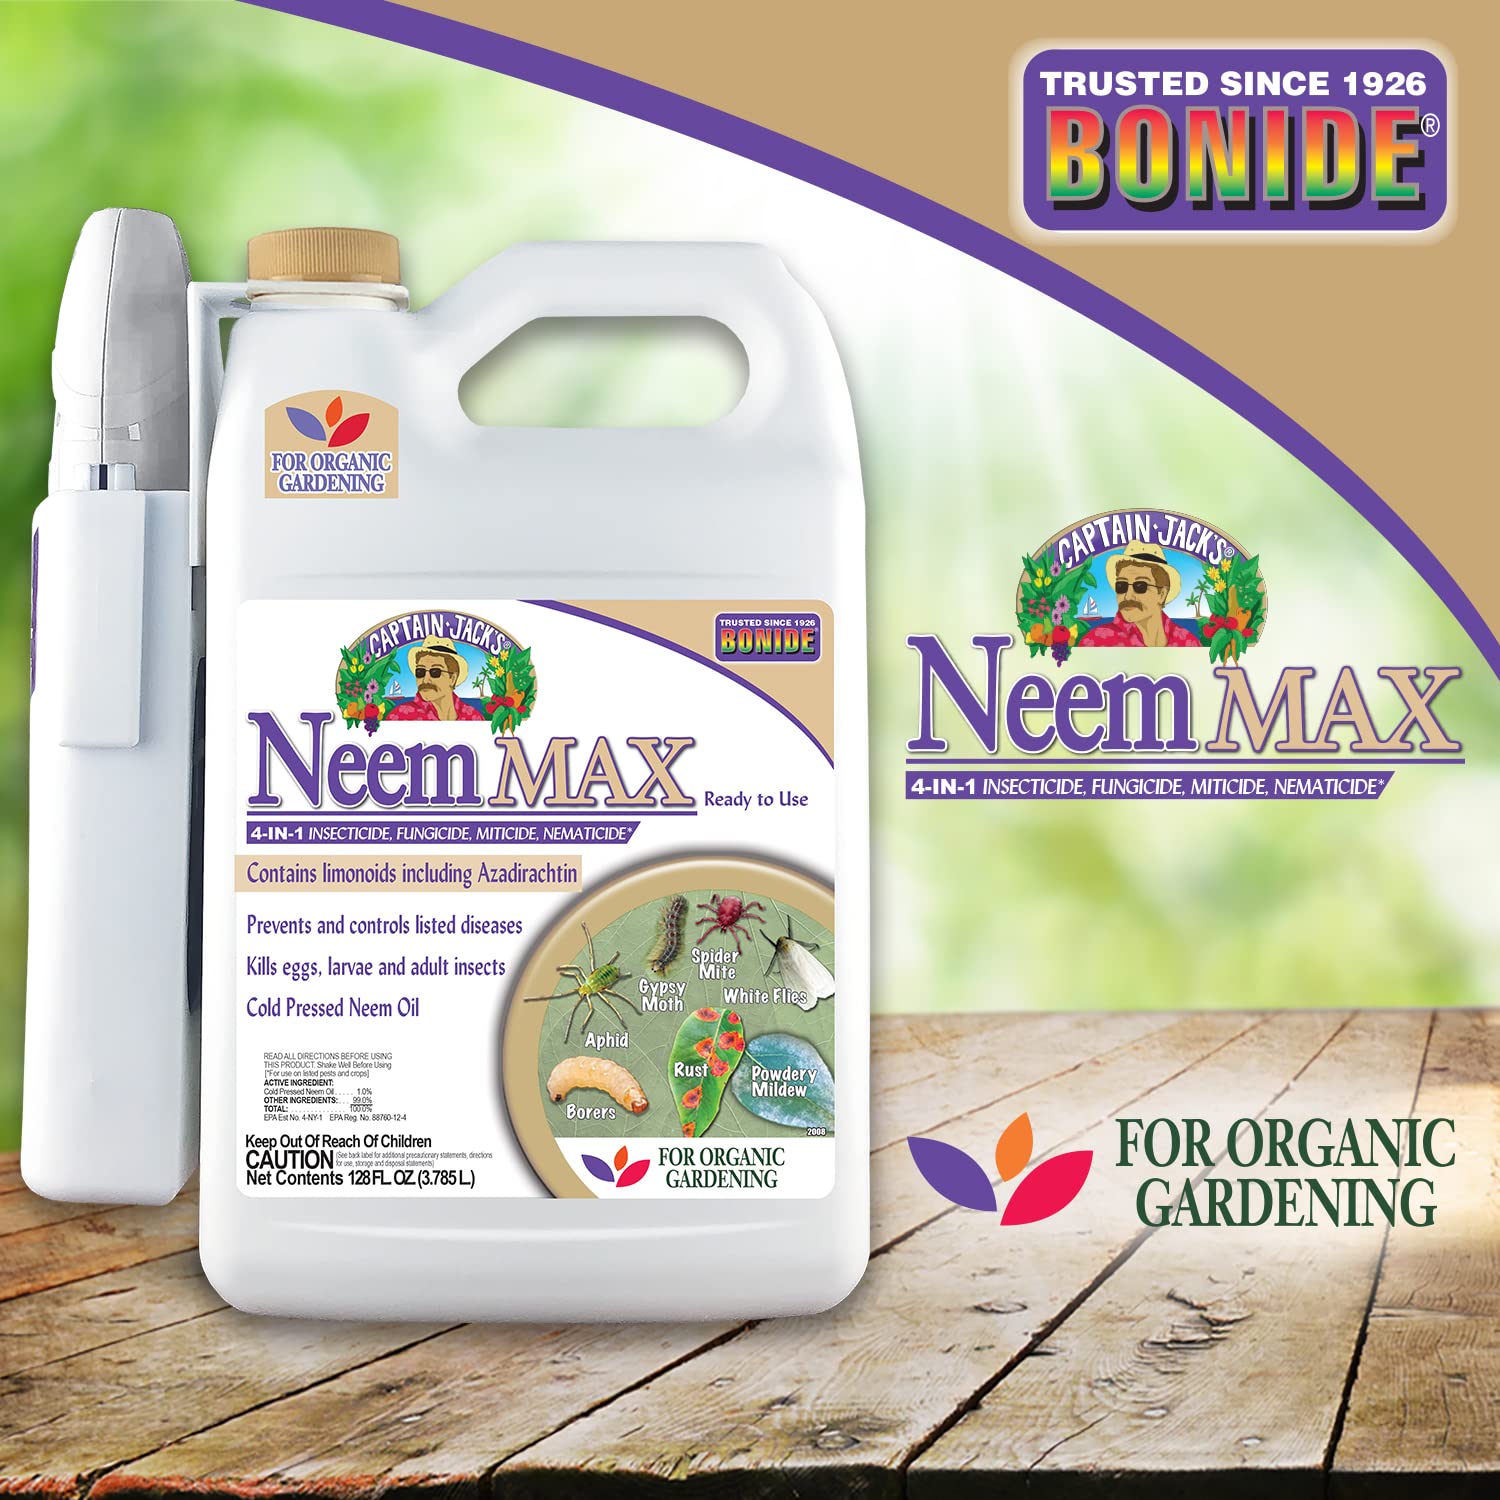 Bonide Captain Jack's Neem Max, 128 oz Ready-to-Use Spray Cold Pressed Neem Oil, Multi-Purpose Insecticide, Fungicide, Miticide and Nematicide for Organic Gardening